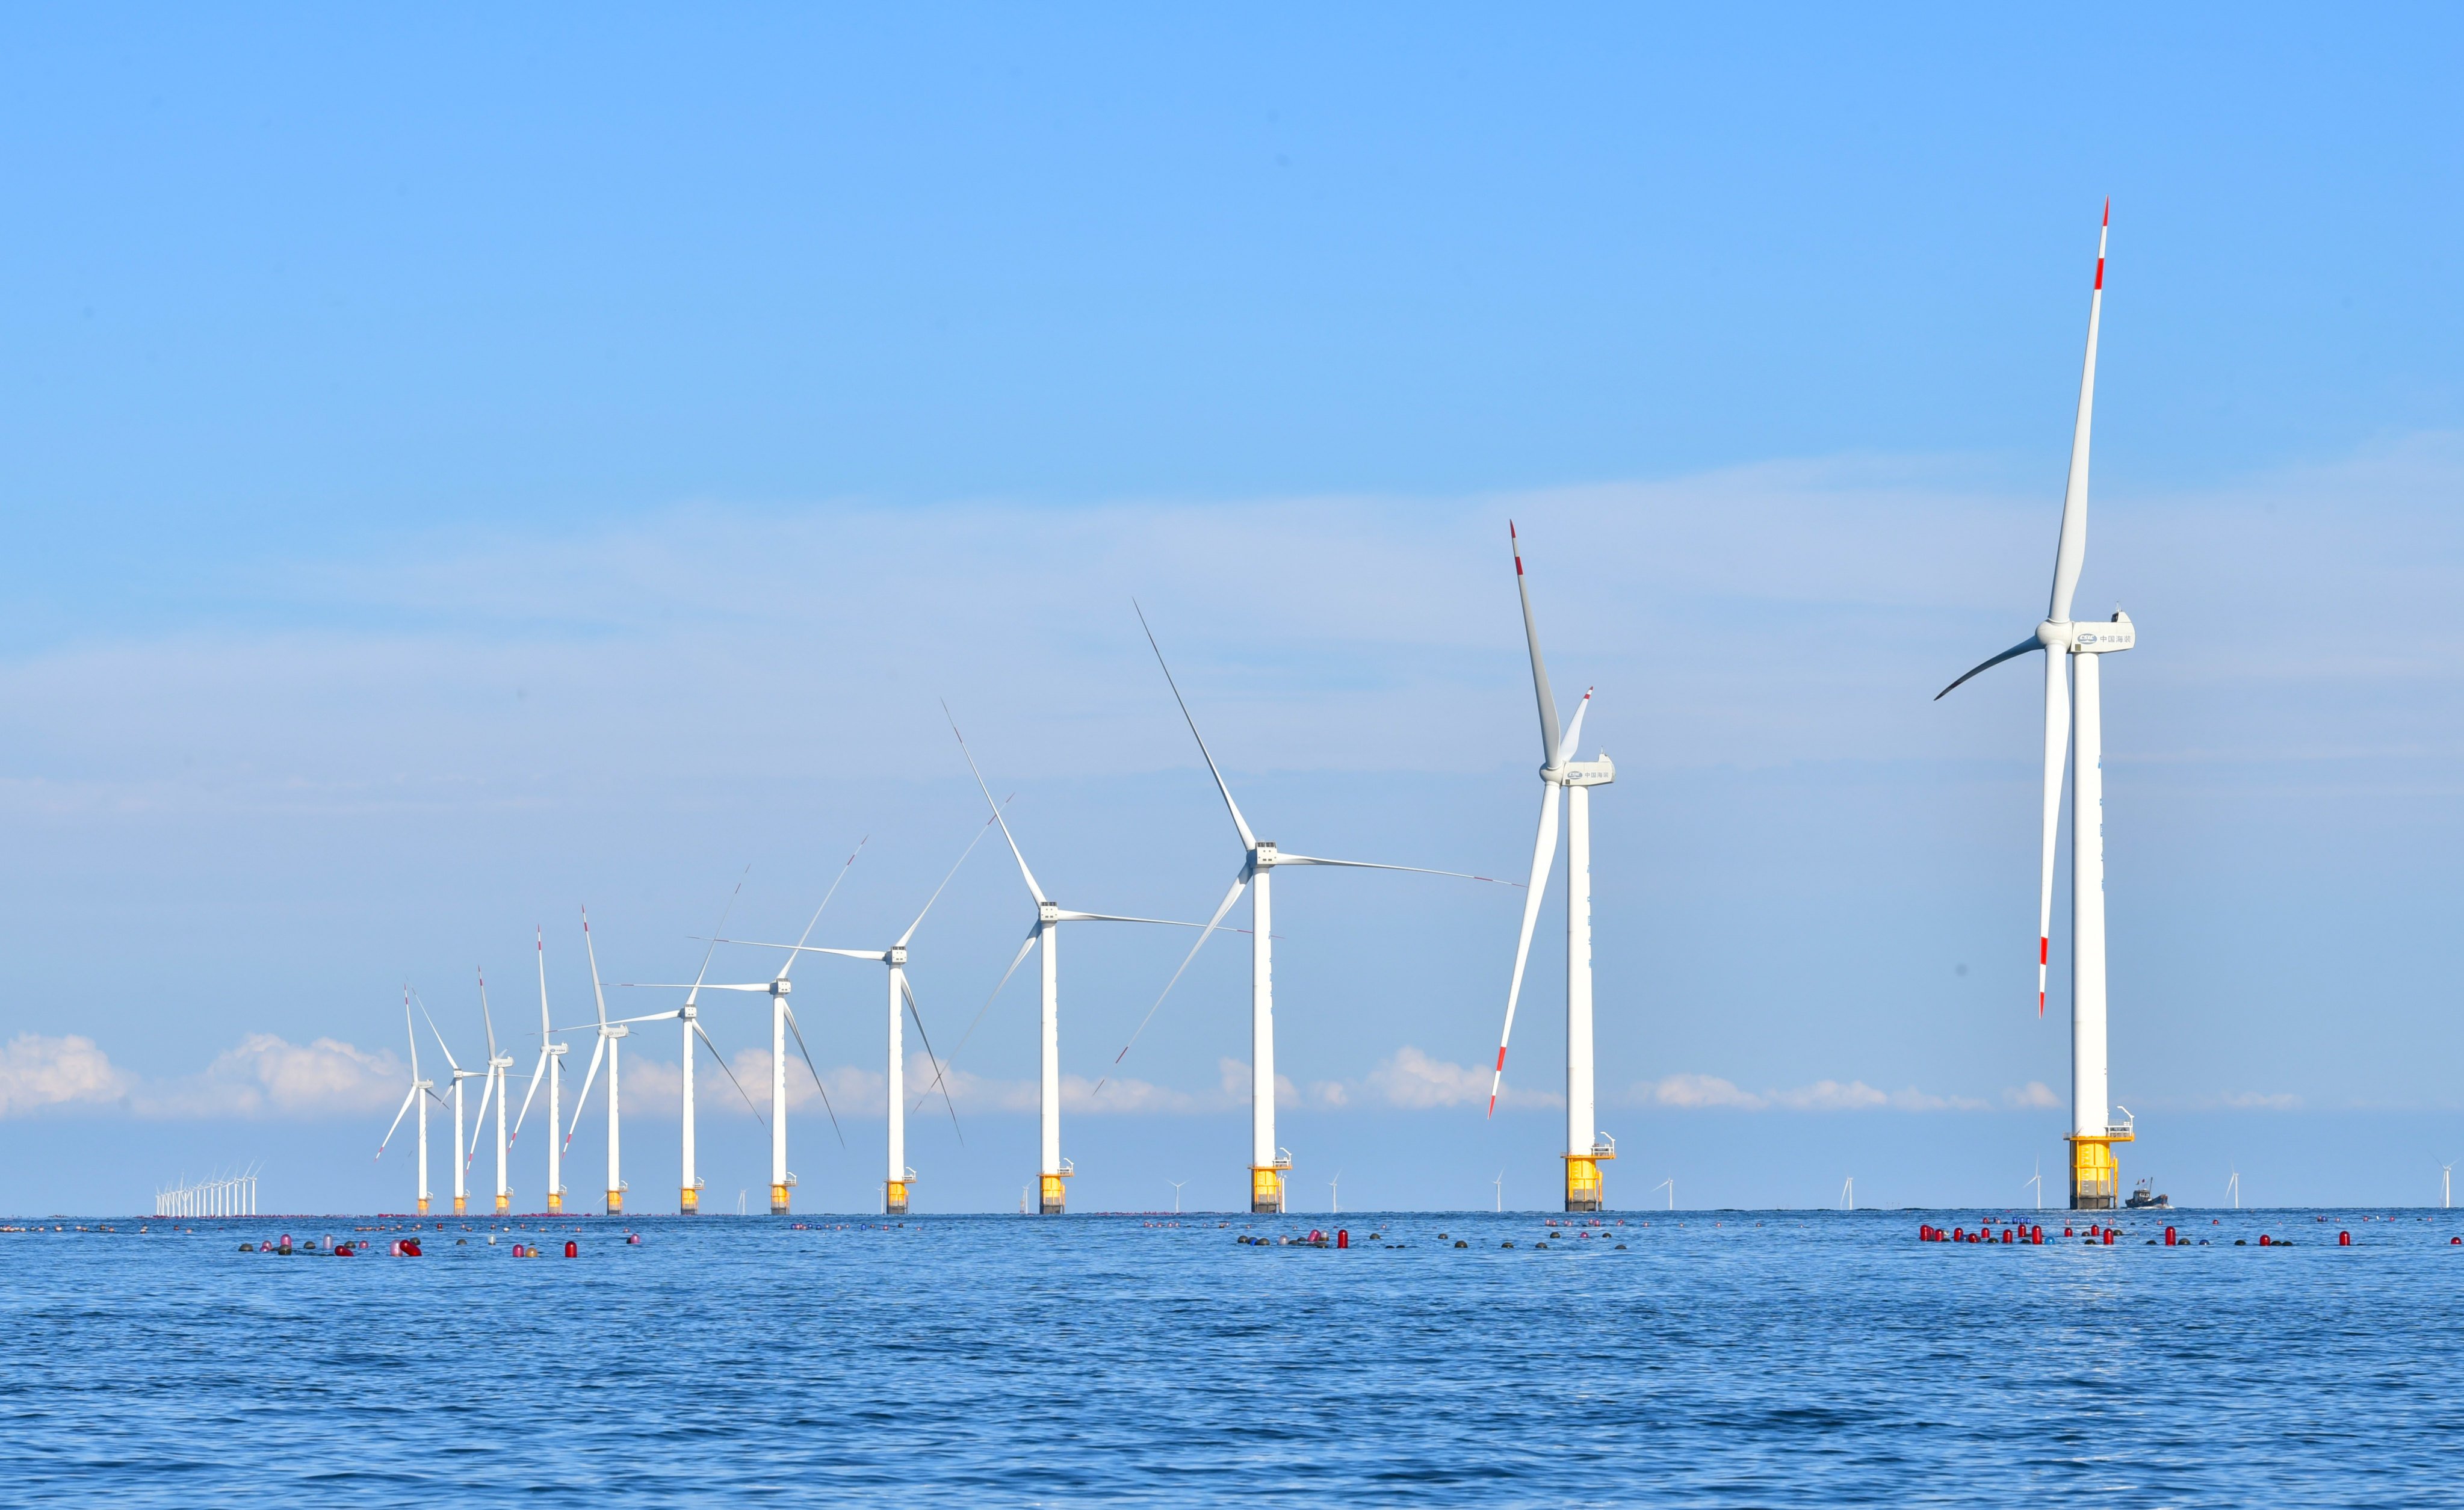 An offshore wind farm is seen in Dalian, Liaoning province, on September 13. Under a planned economy like China’s, policymakers can focus on social priorities such as infrastructure and channel savings directly into these areas. Photo: Xinhua 